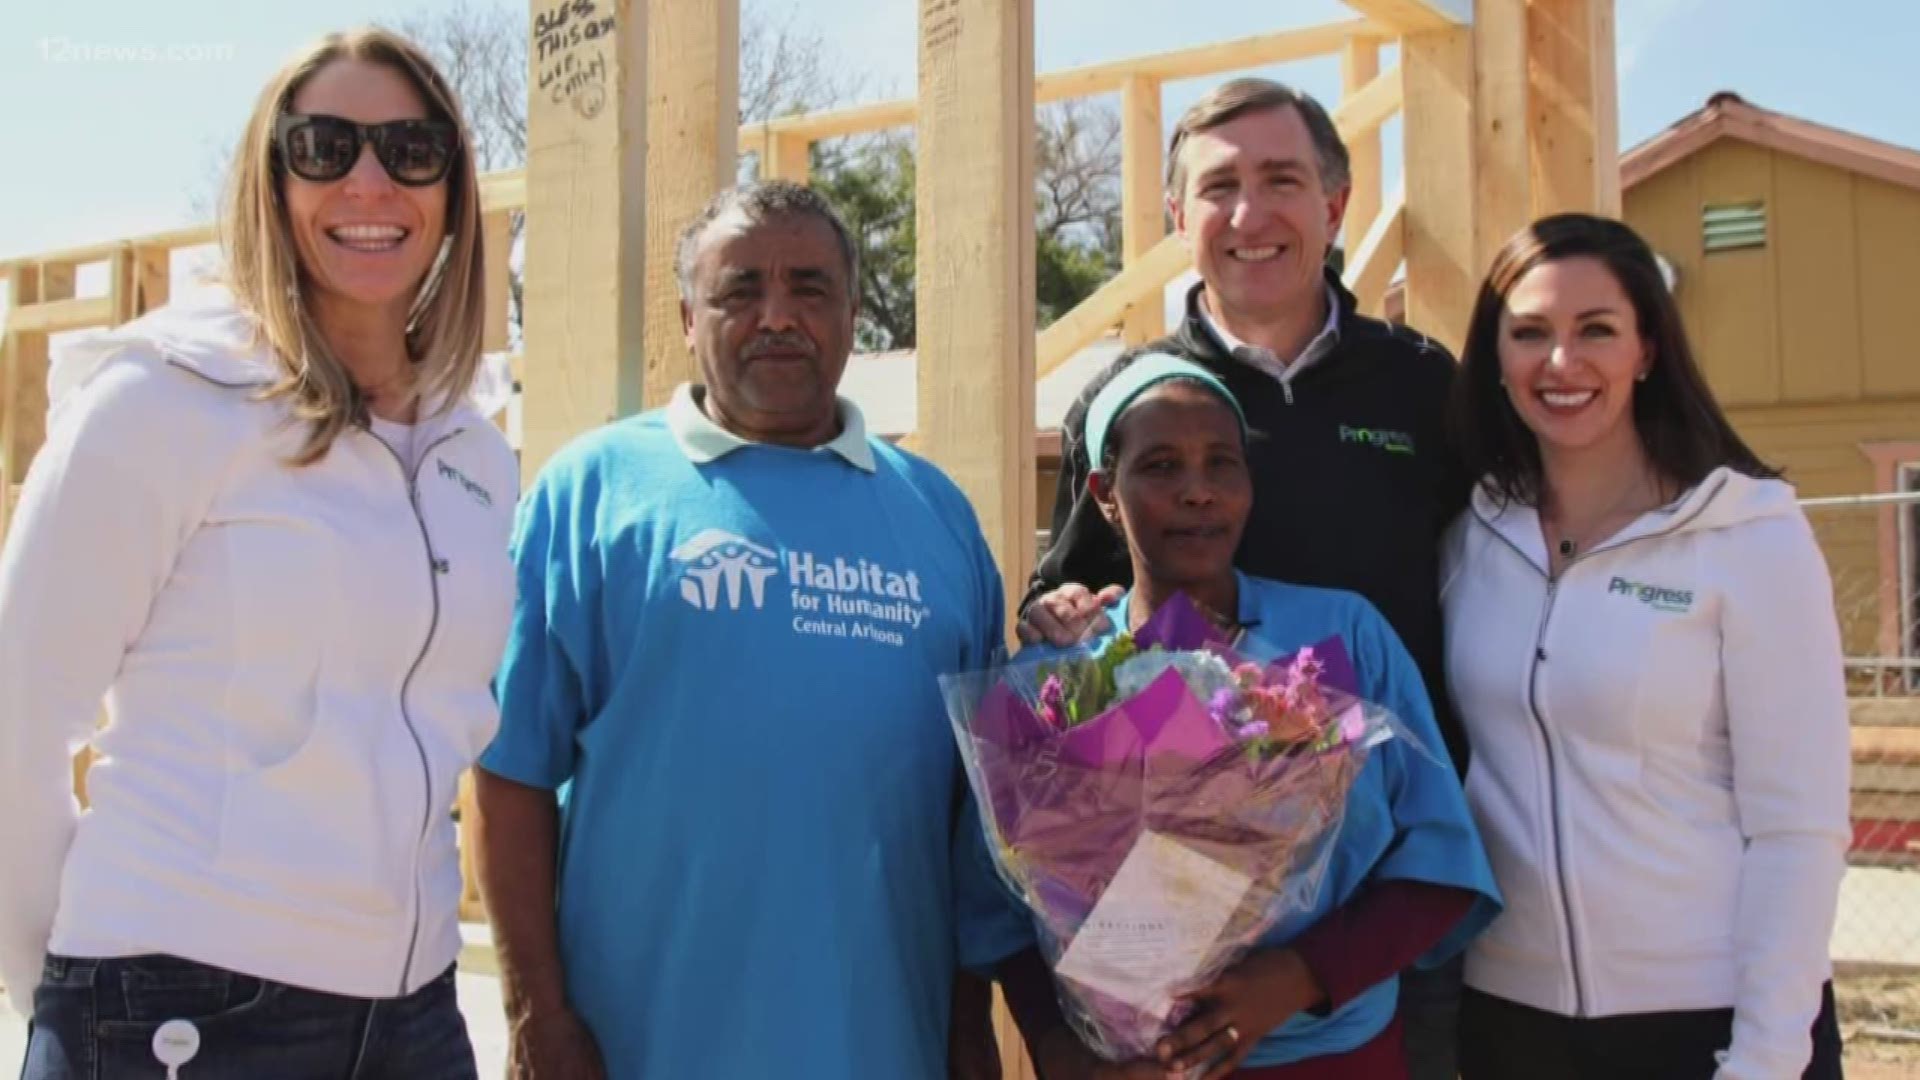 With the help of Habitat for Humanity, volunteers are building a house in south Phoenix for a family looking for the American dream.